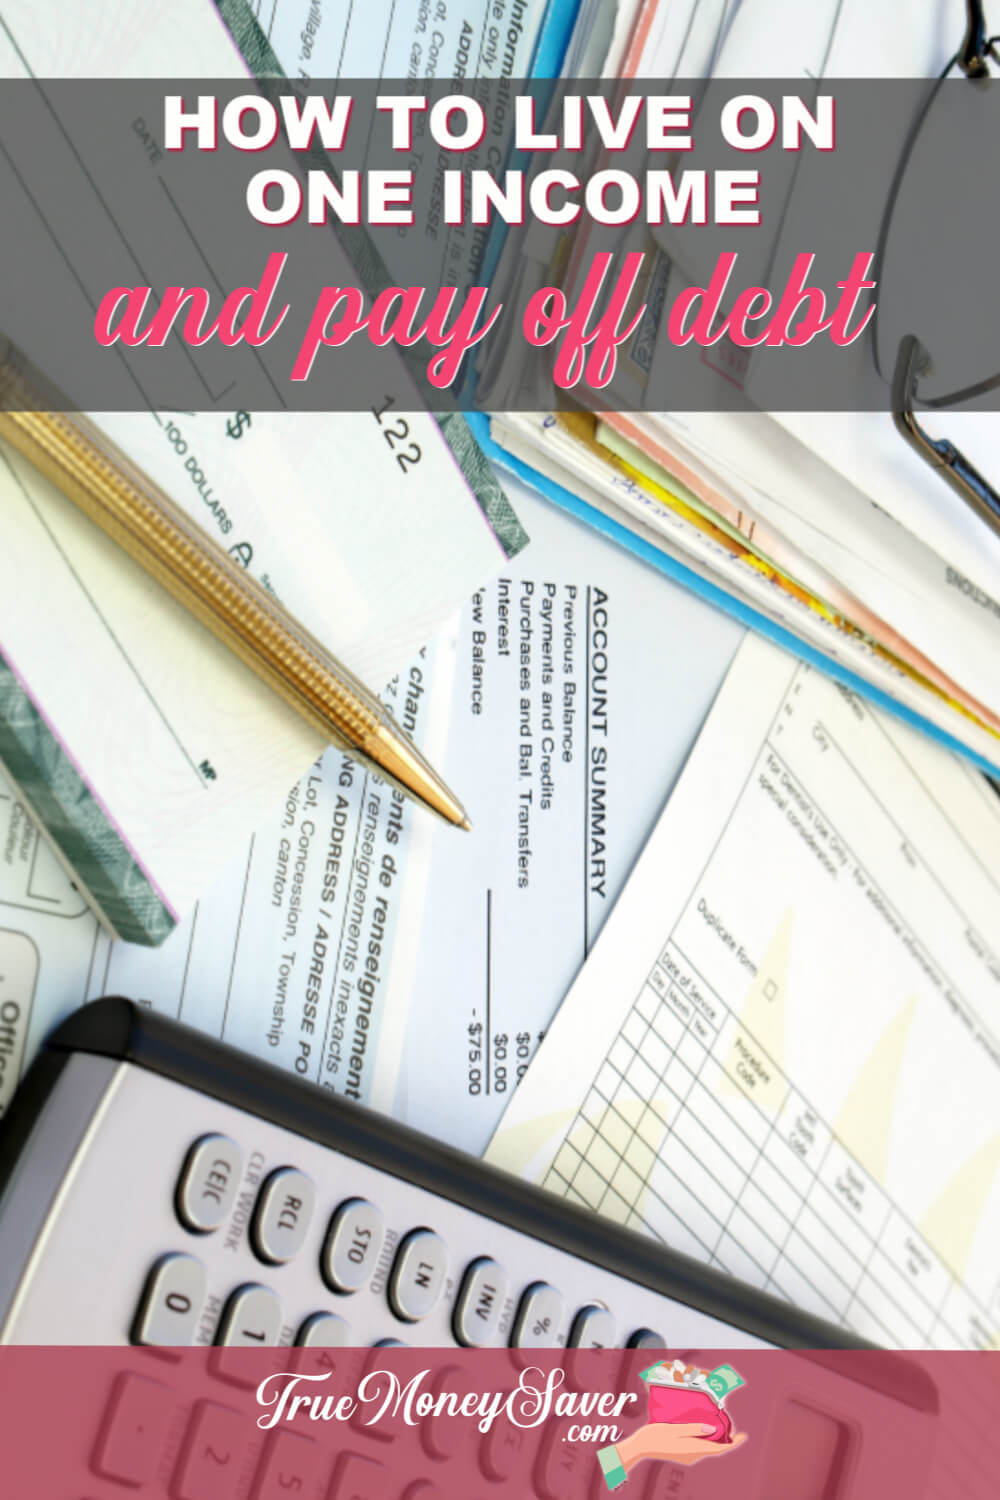 How To Live On One Income AND Pay Off Debt